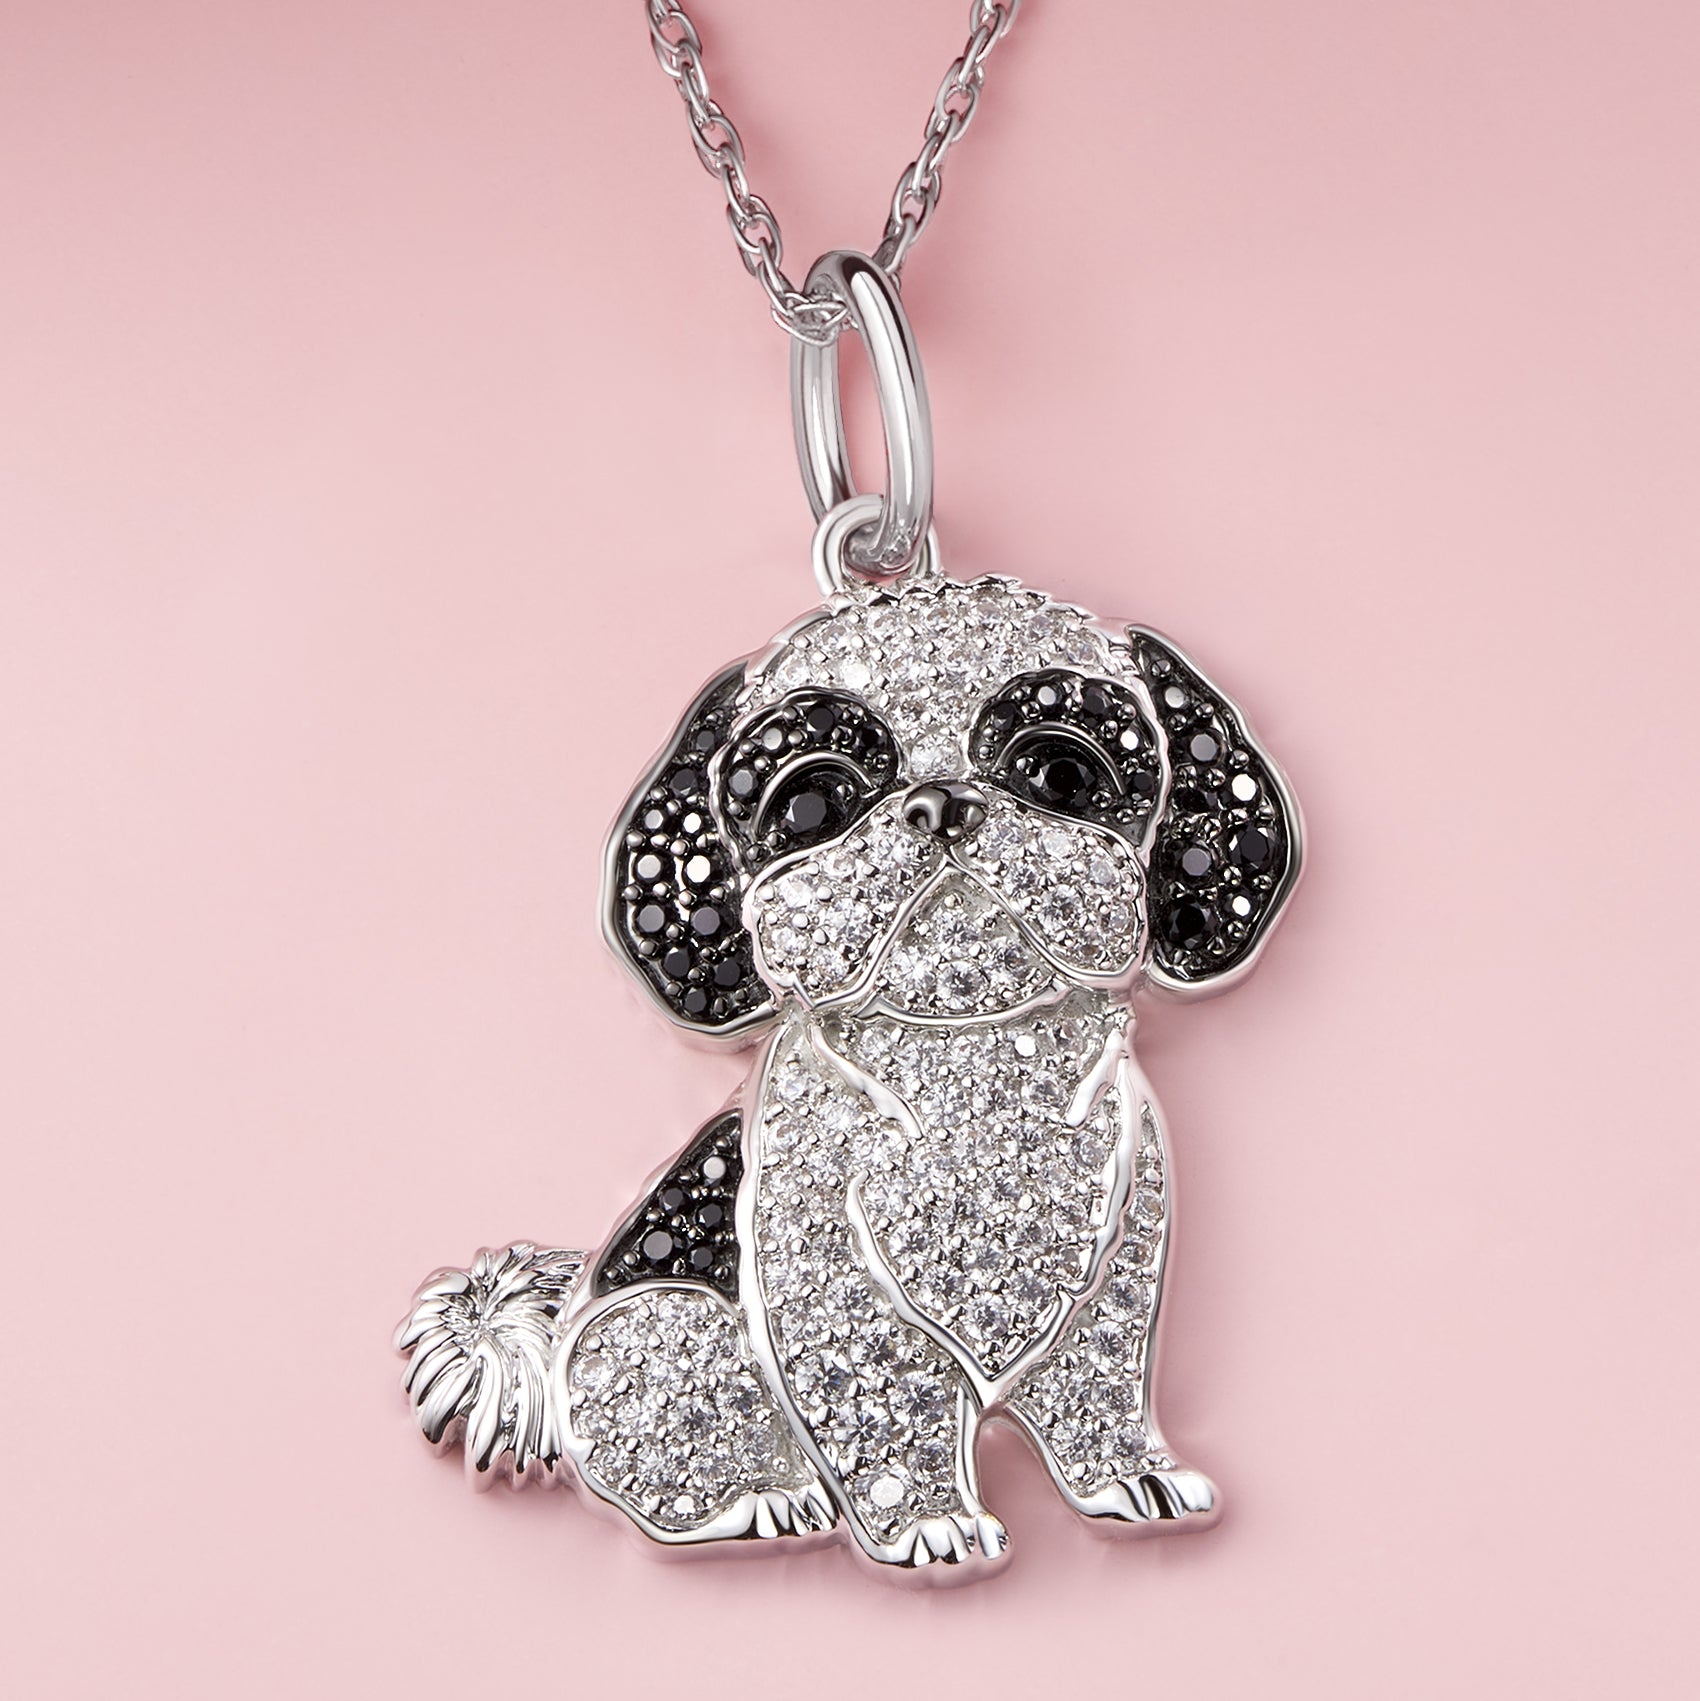 The Puppy Gold Pendant For Kids |